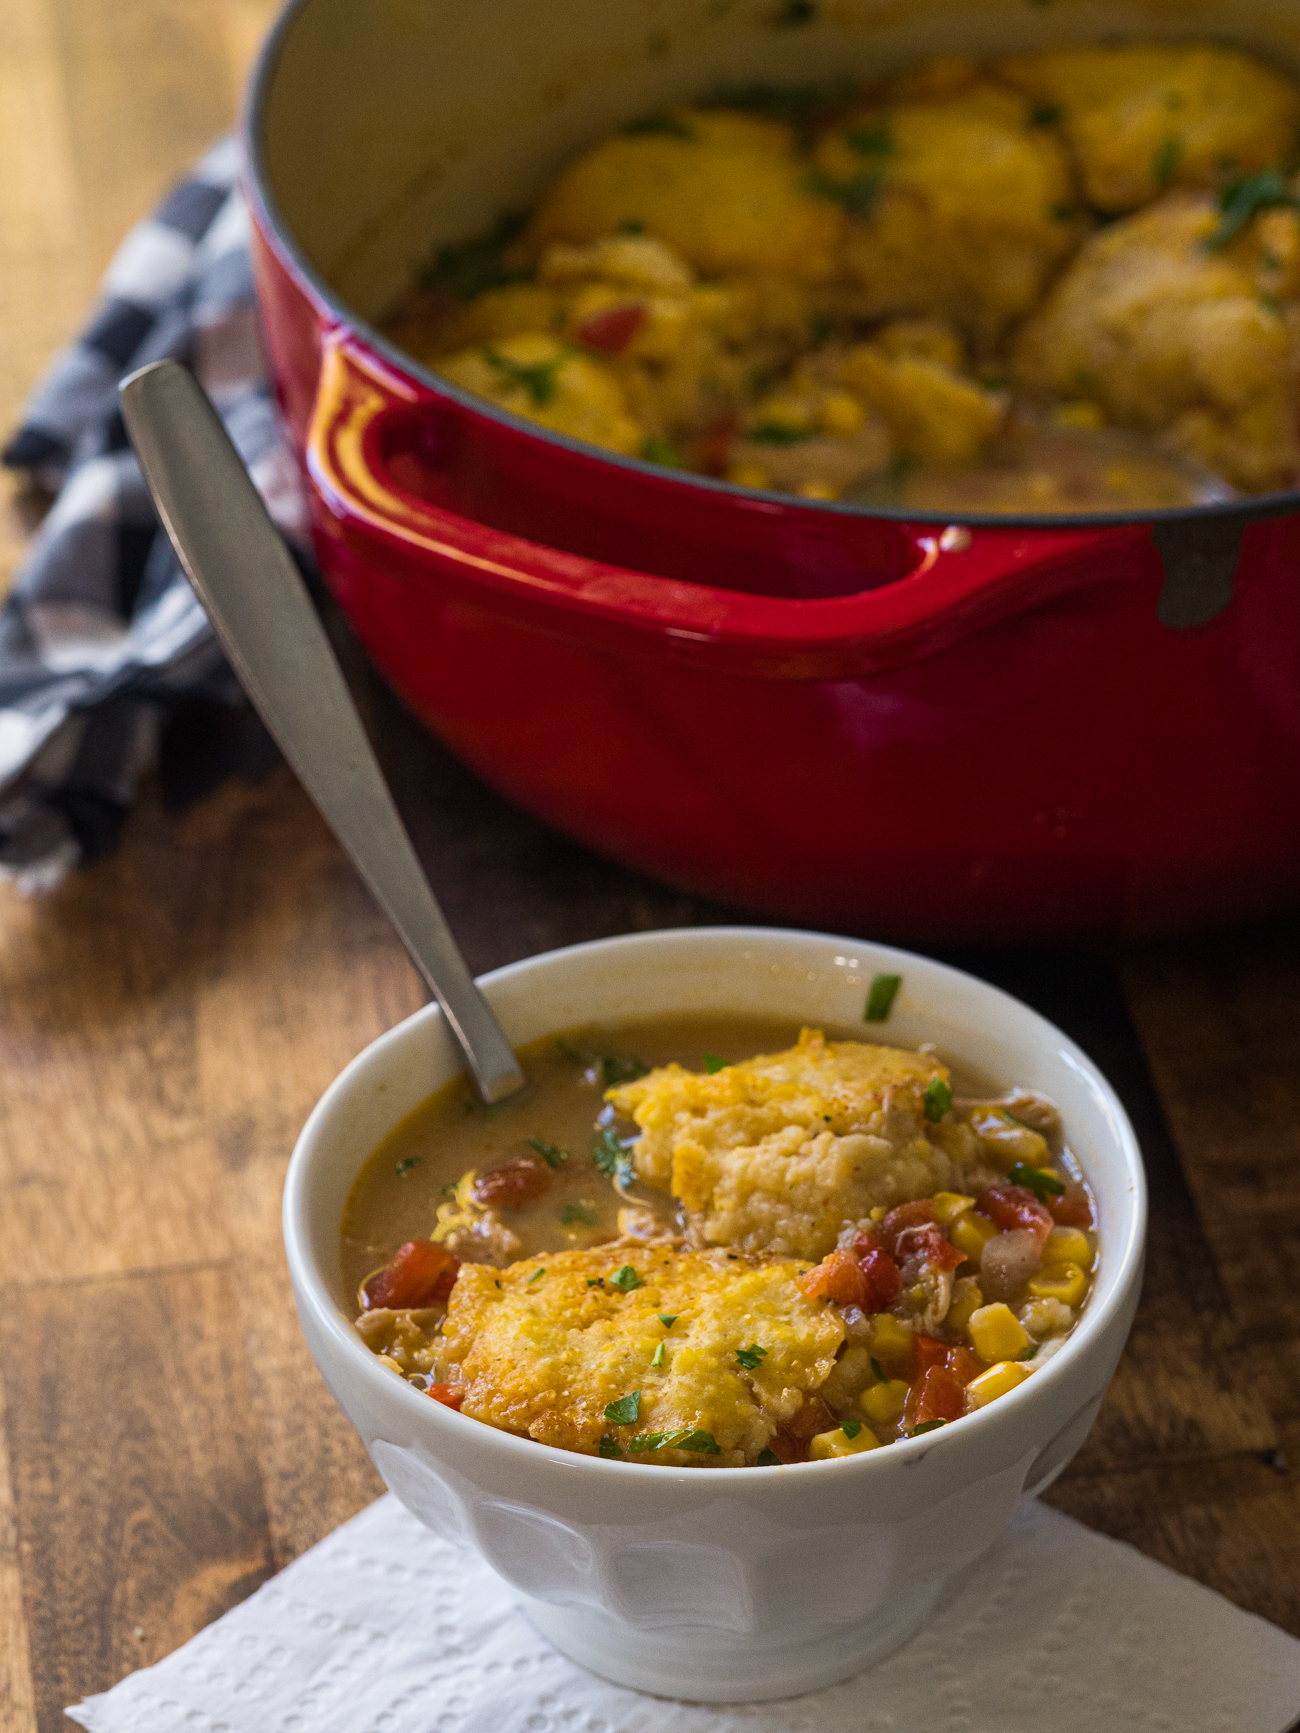 https://12tomatoes.com/wp-content/uploads/sites/2/2019/10/Southwest-Chicken-Chowder-With-Cornbread-Dumplings-Vertical-12-of-18.jpg